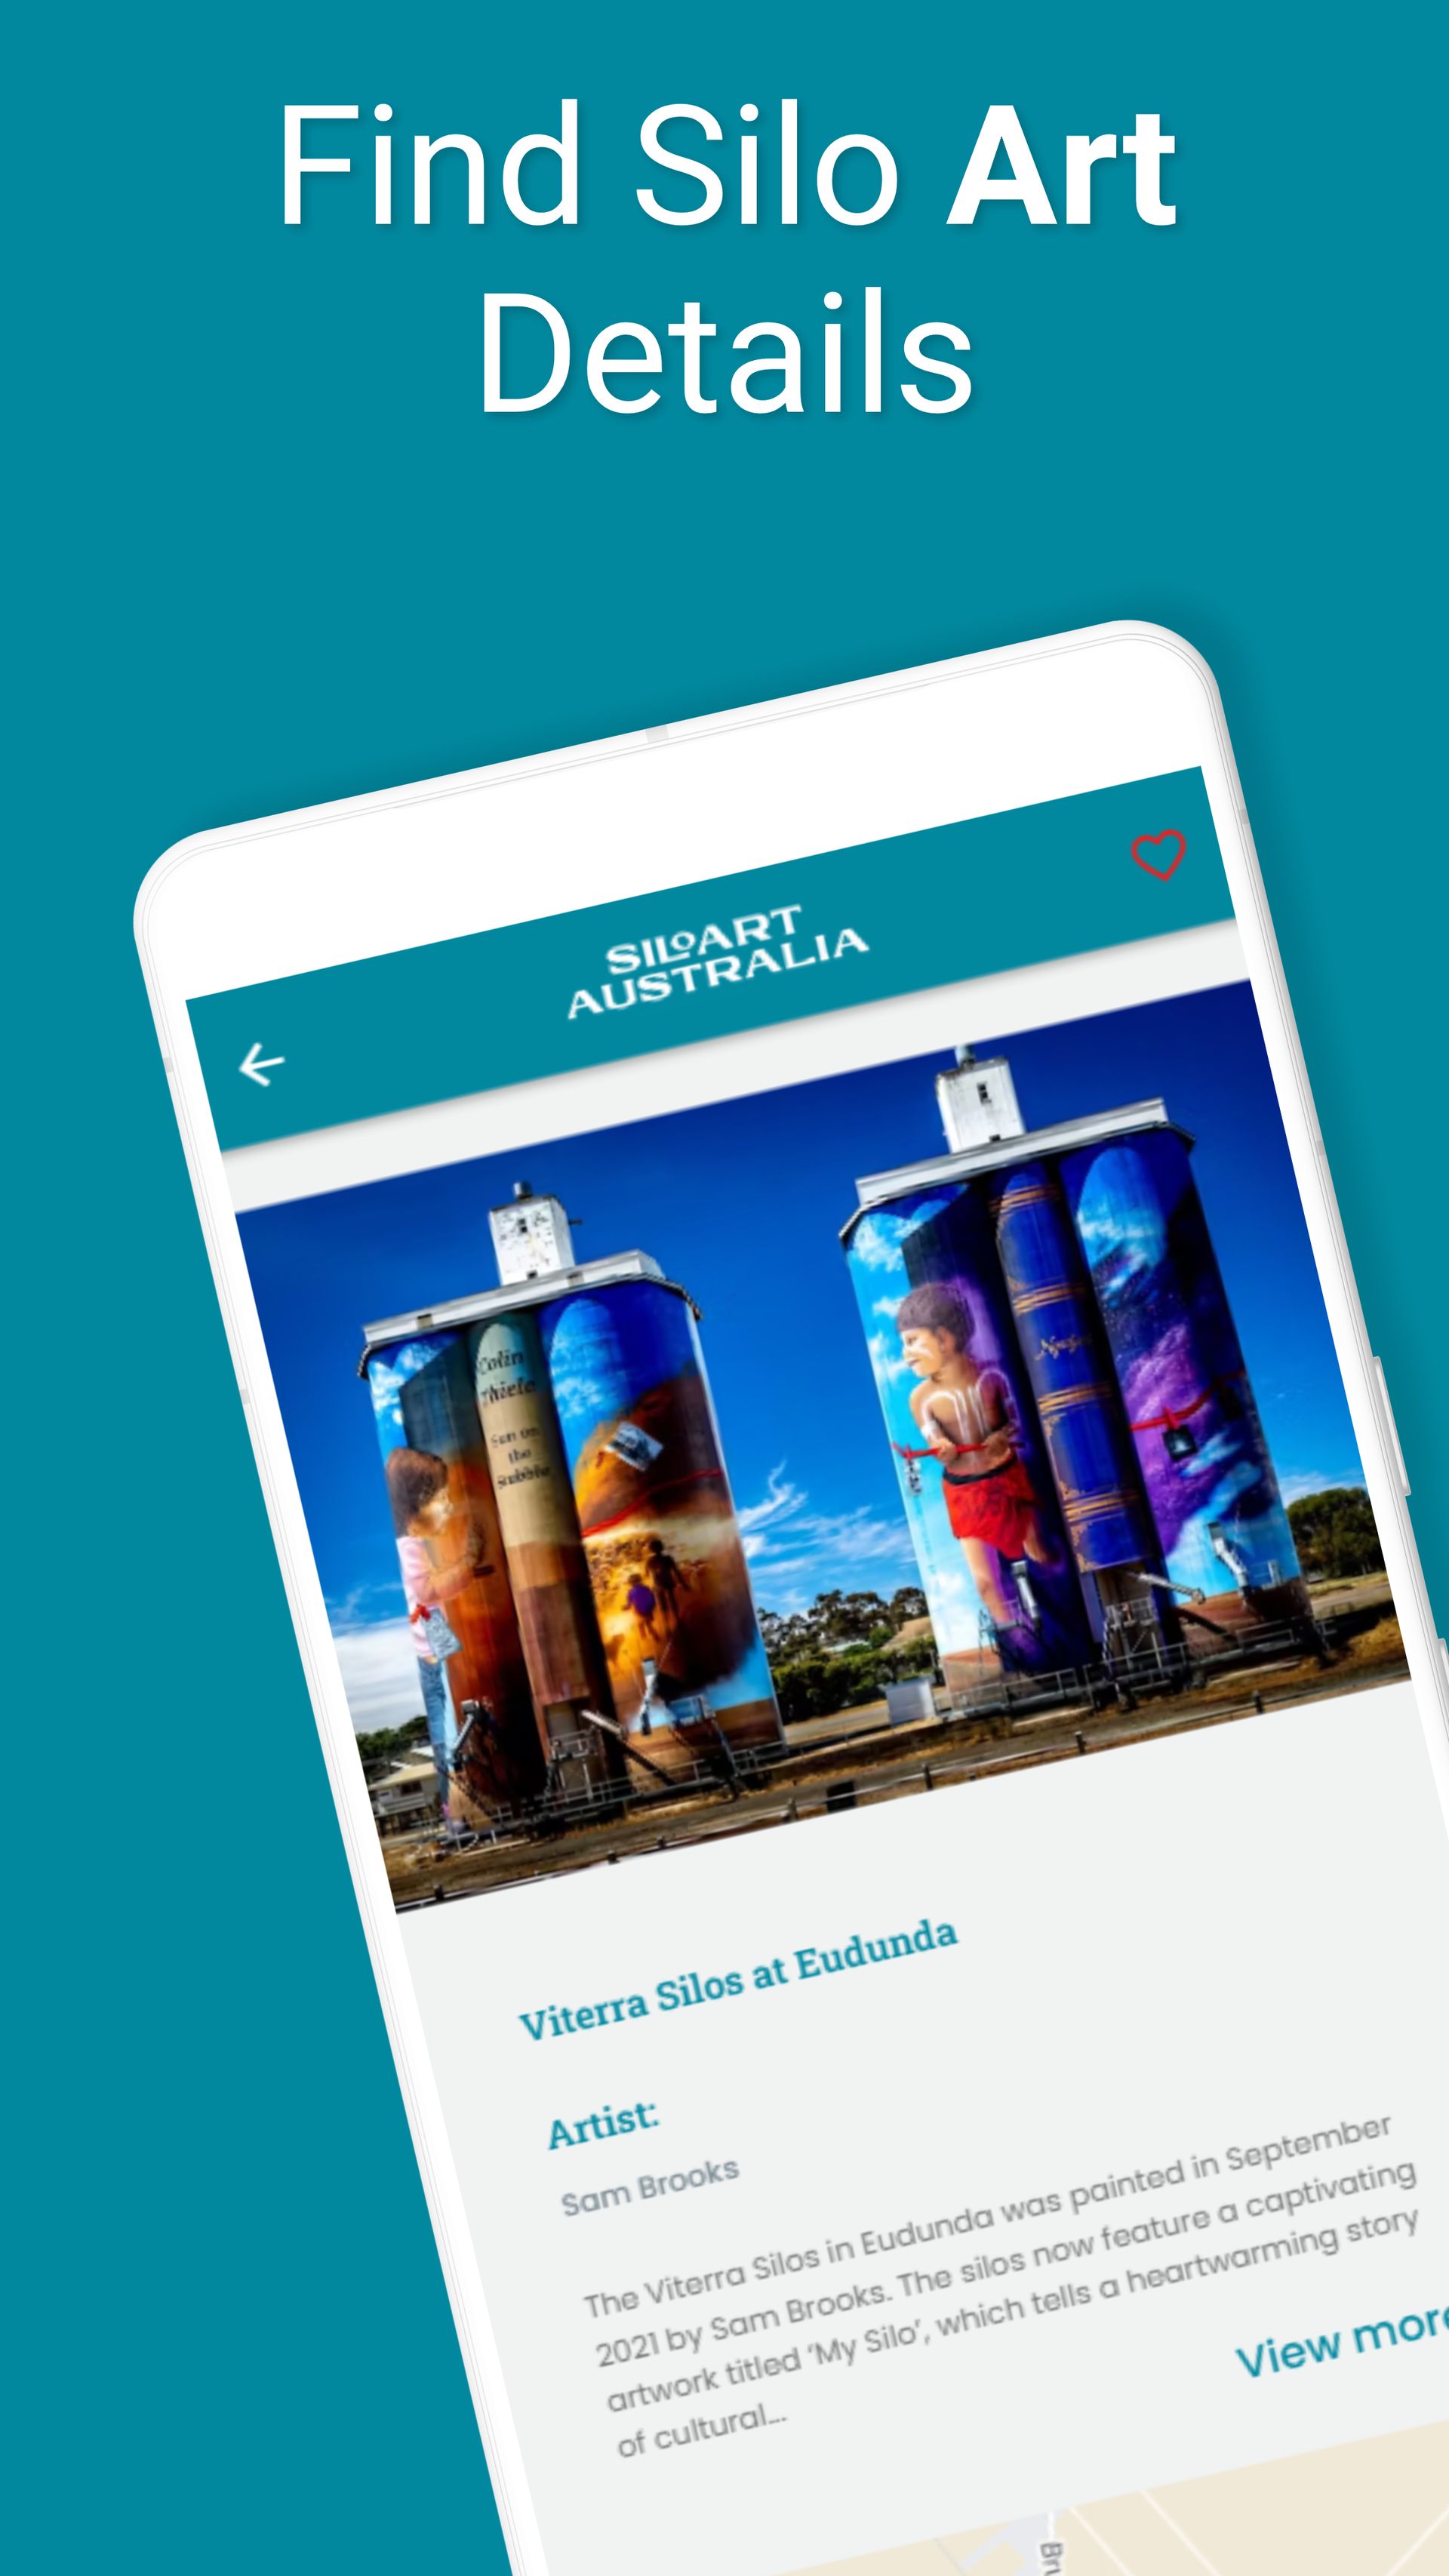 A phone screen shows a picture of silos painted in different colors.